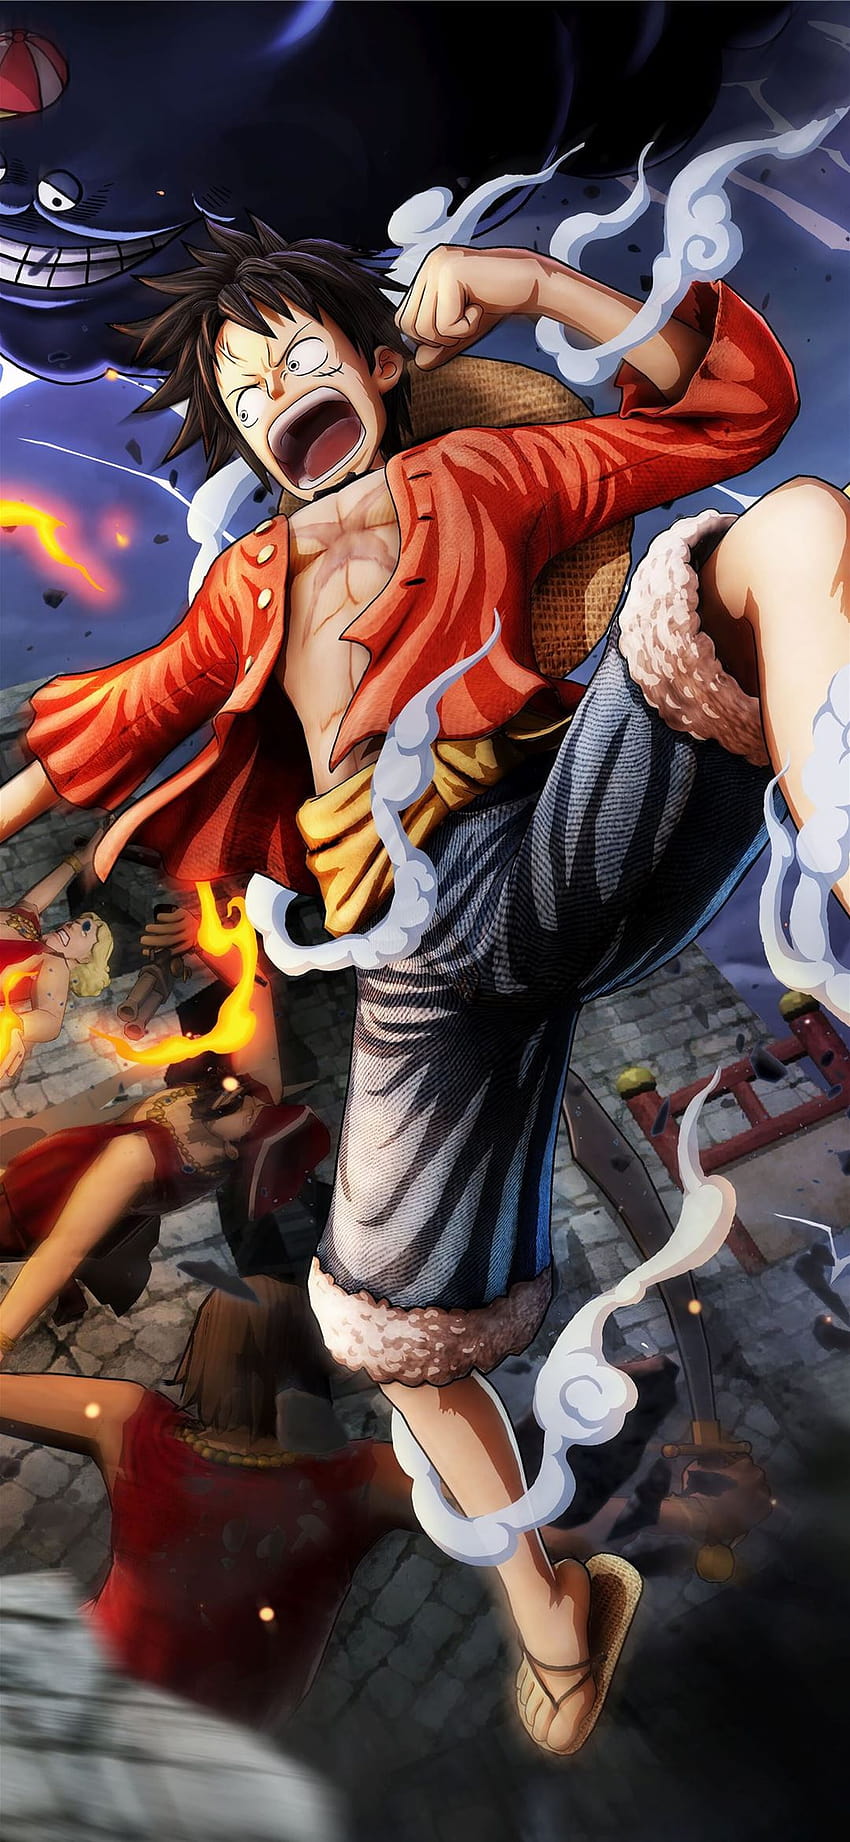 Anime One Piece KoLPaPer Awesome iPhone, one piece aesthetic ipad HD phone wallpaper